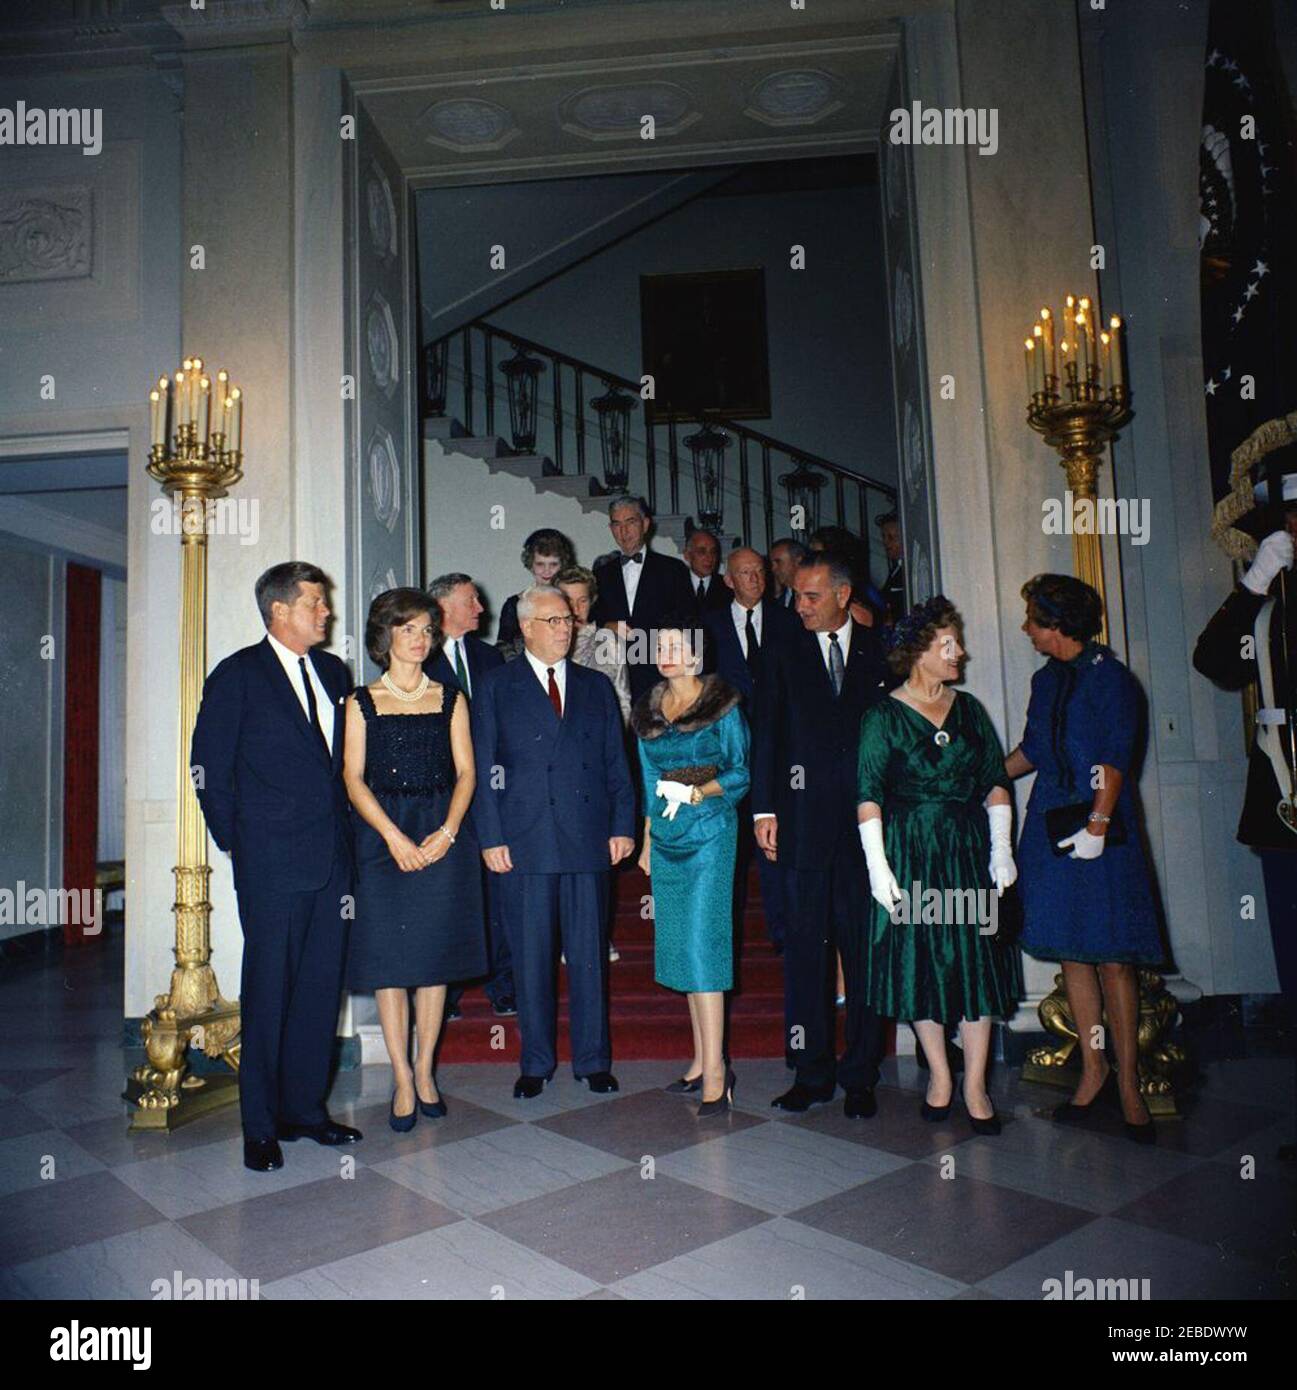 Judicial Reception, 6:00PM. White House reception for Judicial Branch. Front row (L u2013 R): President John F. Kennedy; First Lady Jacqueline Kennedy; Chief Justice Earl Warren; Lady Bird Johnson; Vice President Lyndon Johnson; Nina Warren, wife of Chief Justice Warren; Ethel Kennedy. Second row (L u2013 R): Supreme Court Associate Justice William O. Douglas; Mercedes Douglas, wife of Justice Douglas (partially hidden); Supreme Court Associate Justice Hugo Black. Other guests unidentified. Grand Staircase, Entrance Hall, White House, Washington, D.C. Stock Photo